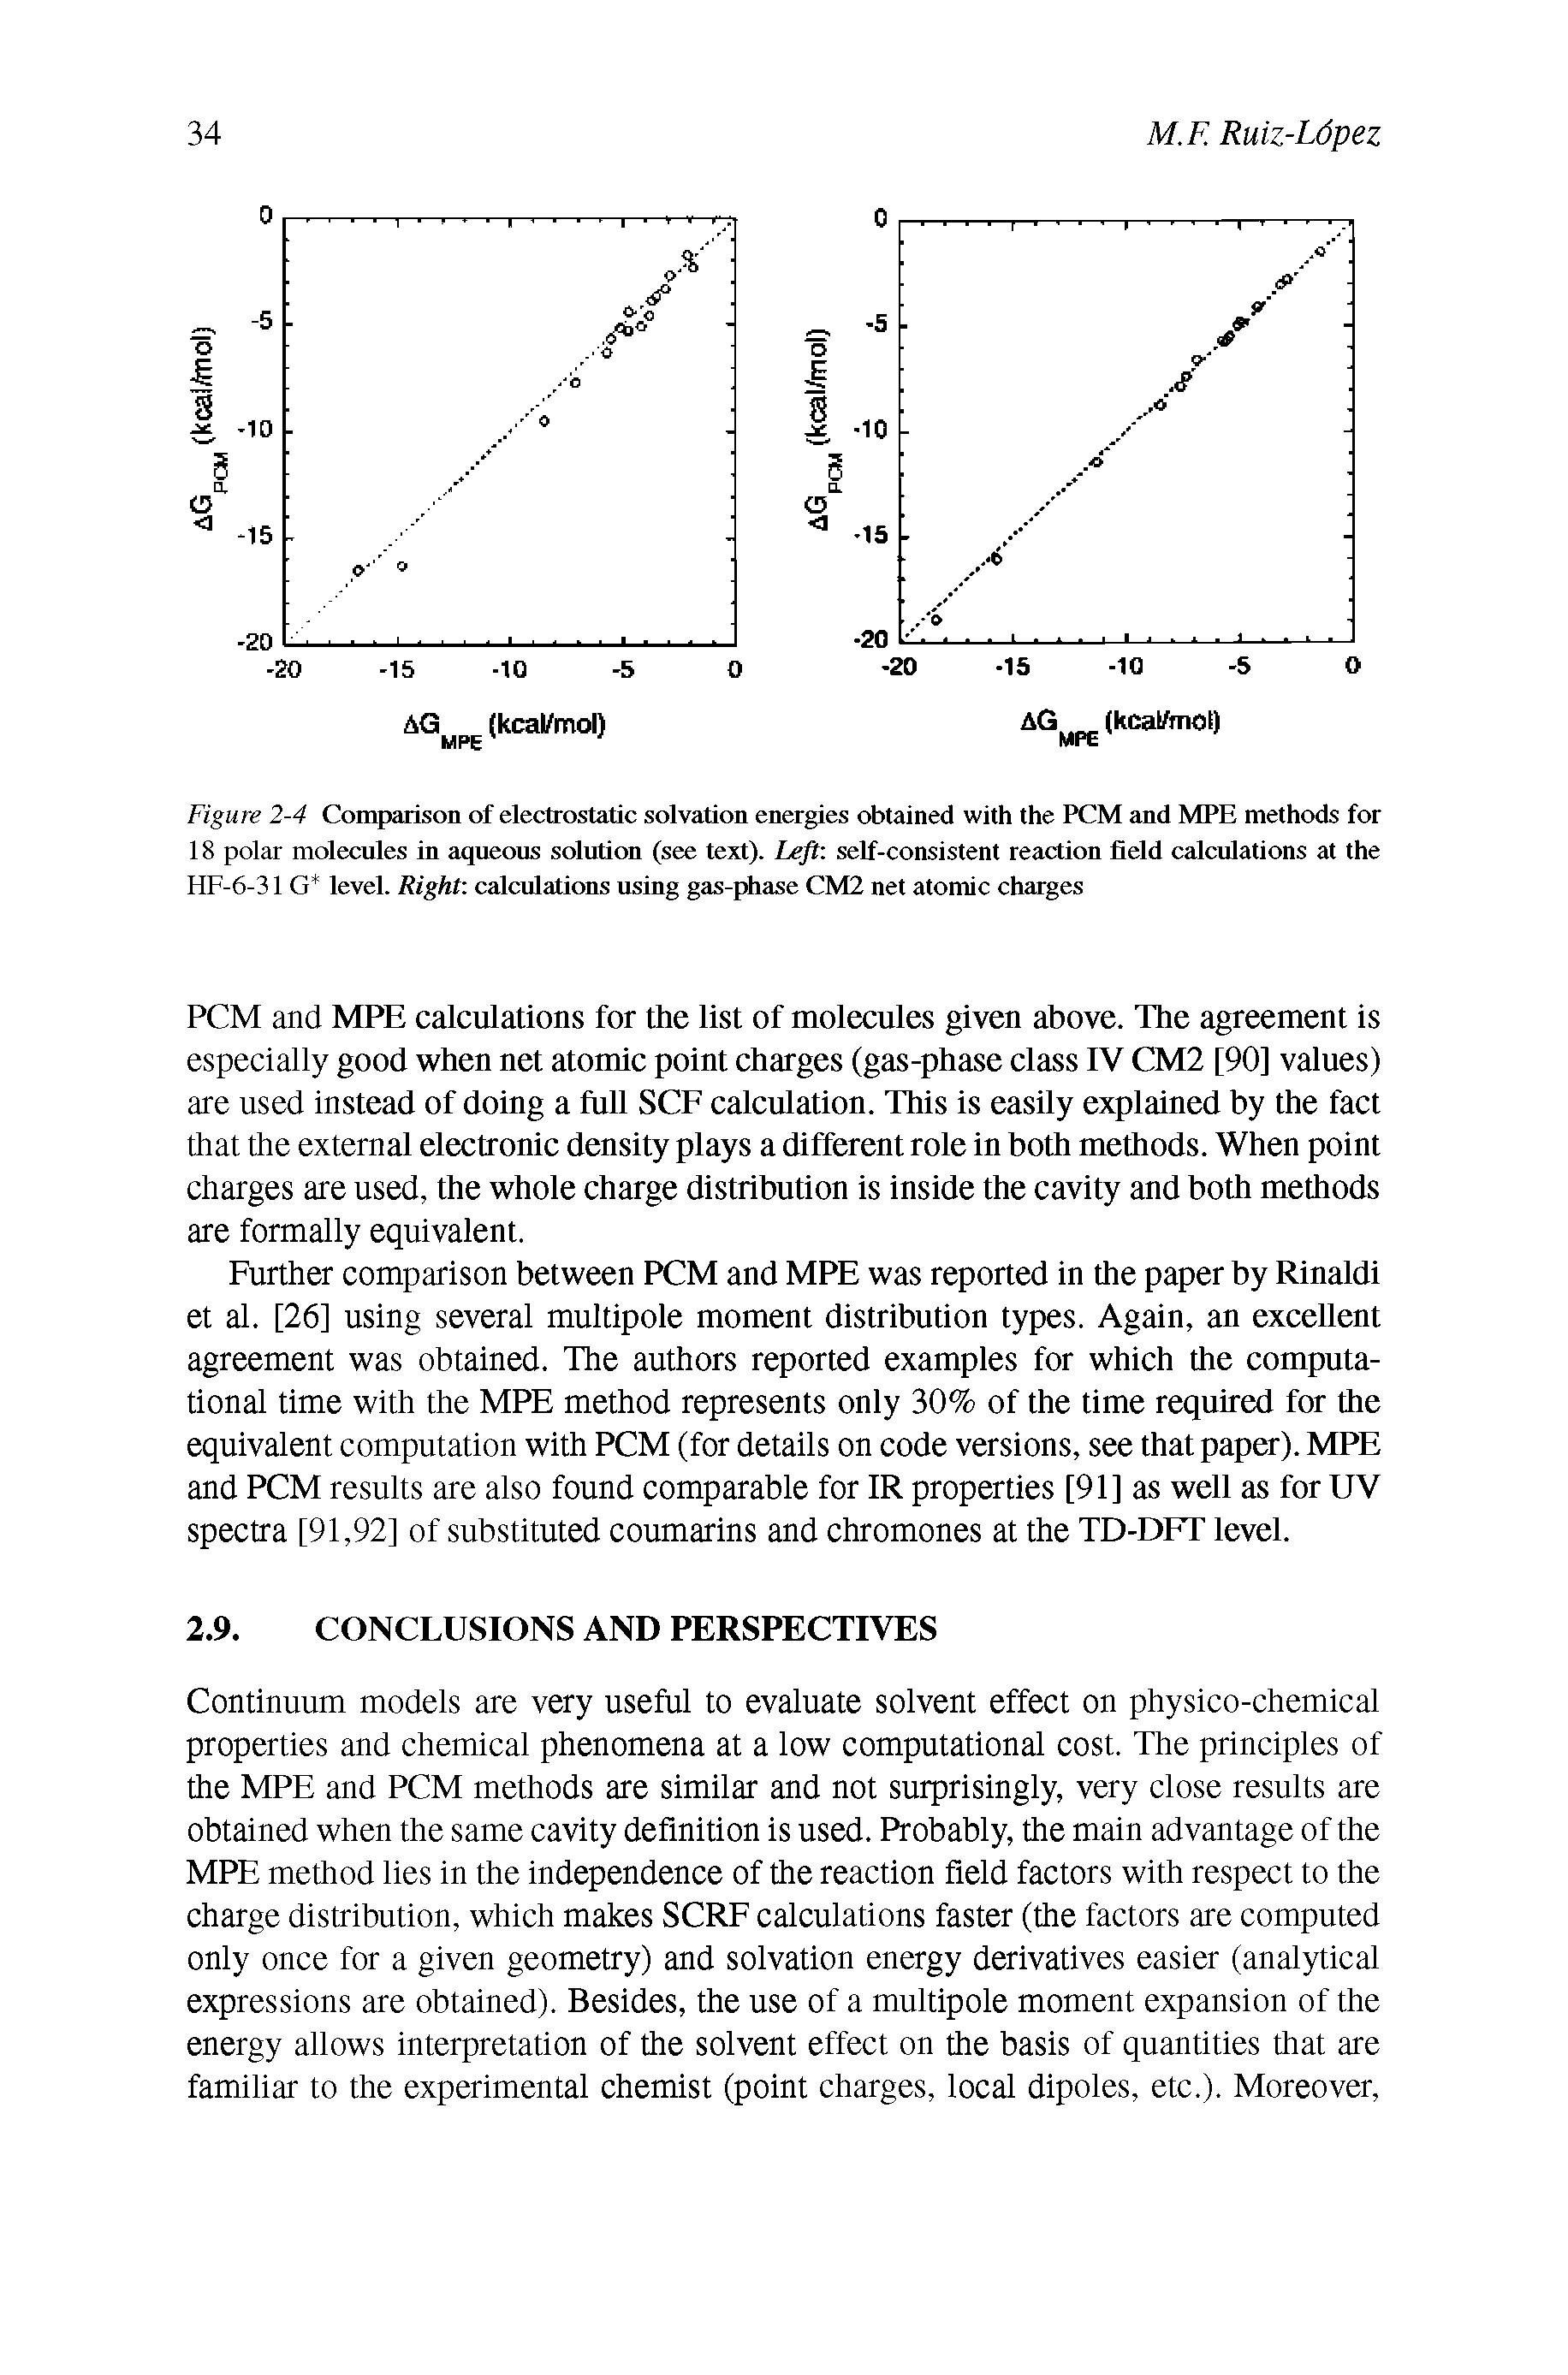 Figure 2-4 Comparison of electrostatic solvation energies obtained with the PCM and MPE methods for 18 polar molecules in aqueous solution (see text). Left self-consistent reaction field calculations at the HF-6-31 G level. Right calculations using gas-phase CM2 net atomic charges...